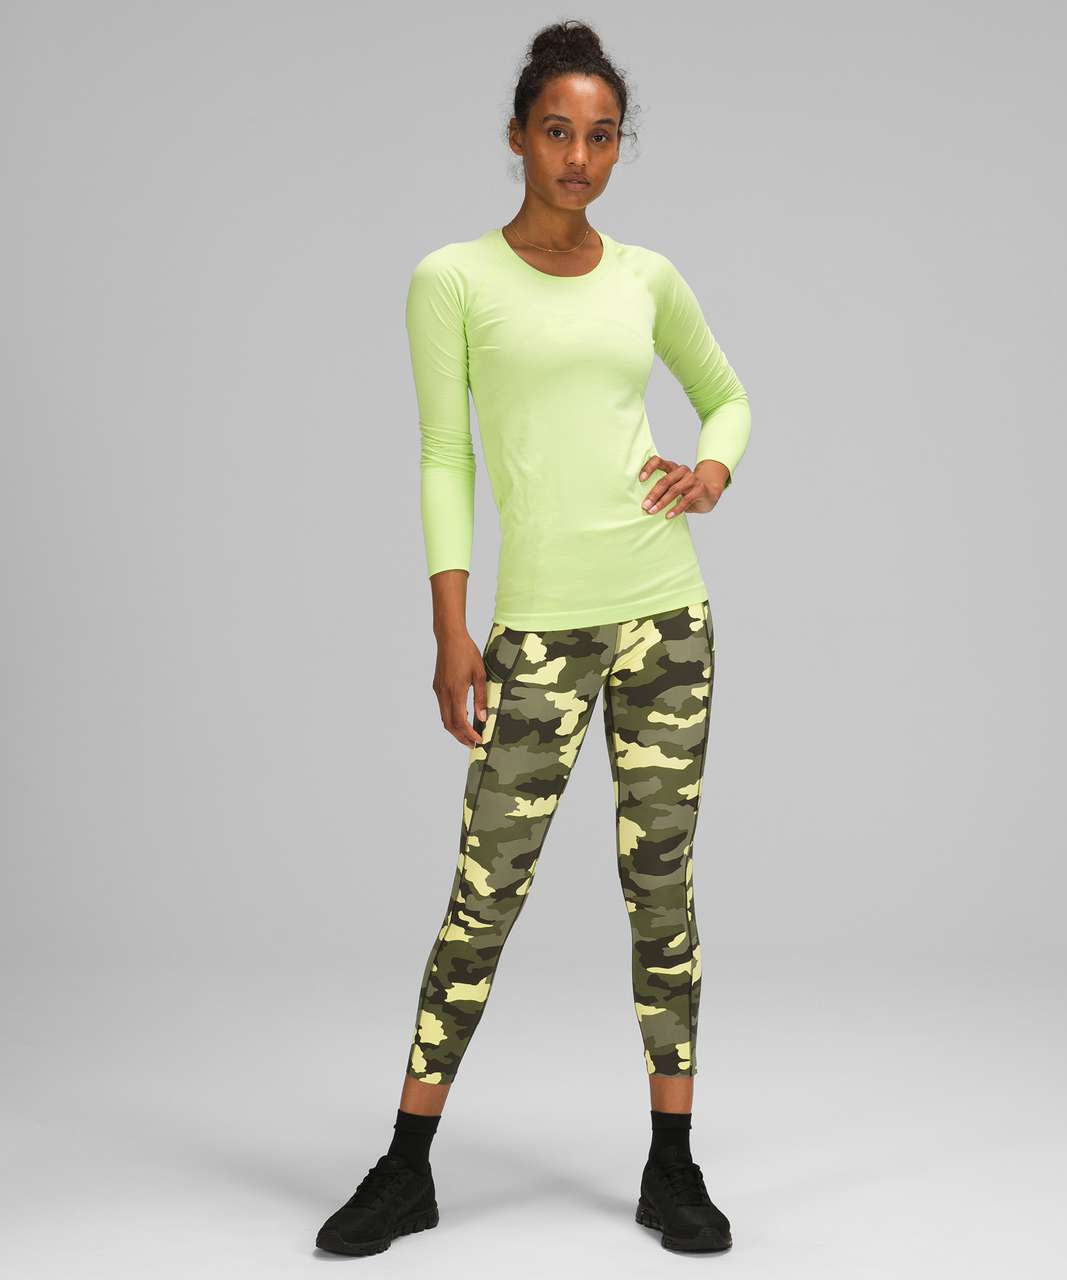 Lululemon Fast and Free High Rise Crop 23 - Heritage 365 Camo